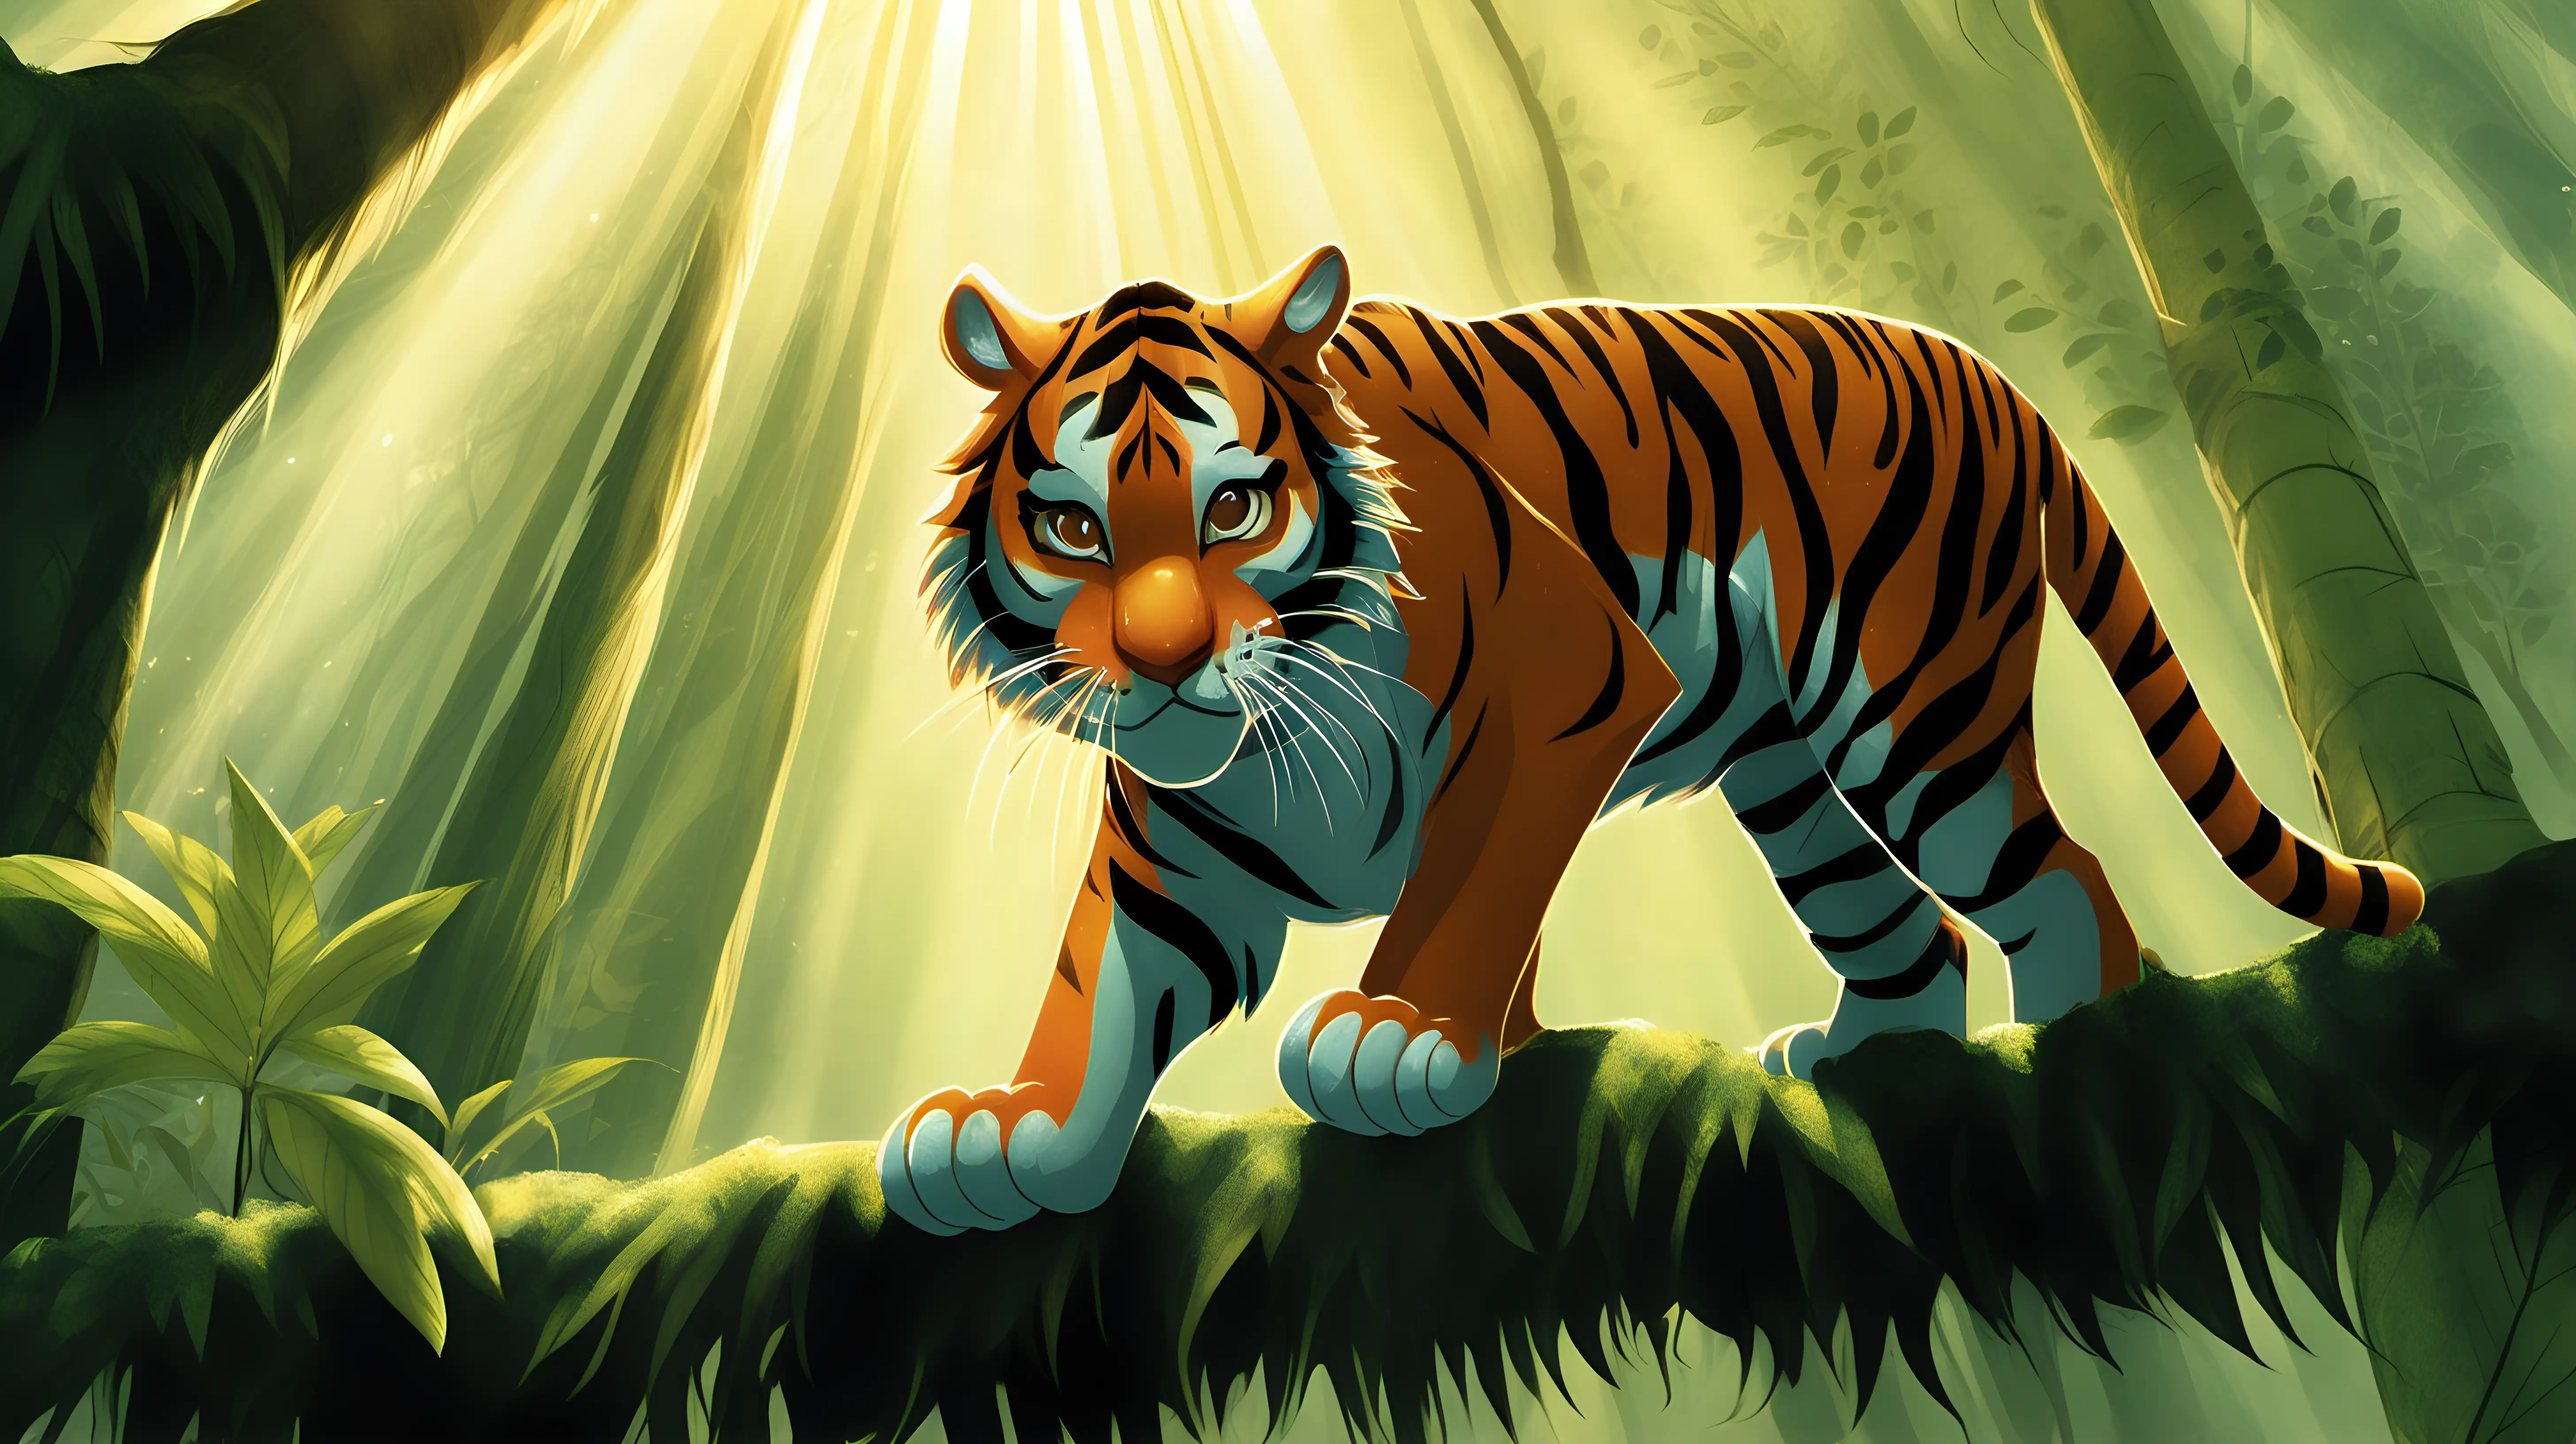 Illustrate a playful scene of a tiger interacting with a beam of sunlight filtering through a dense canopy, capturing the joy and curiosity of this incredible feline